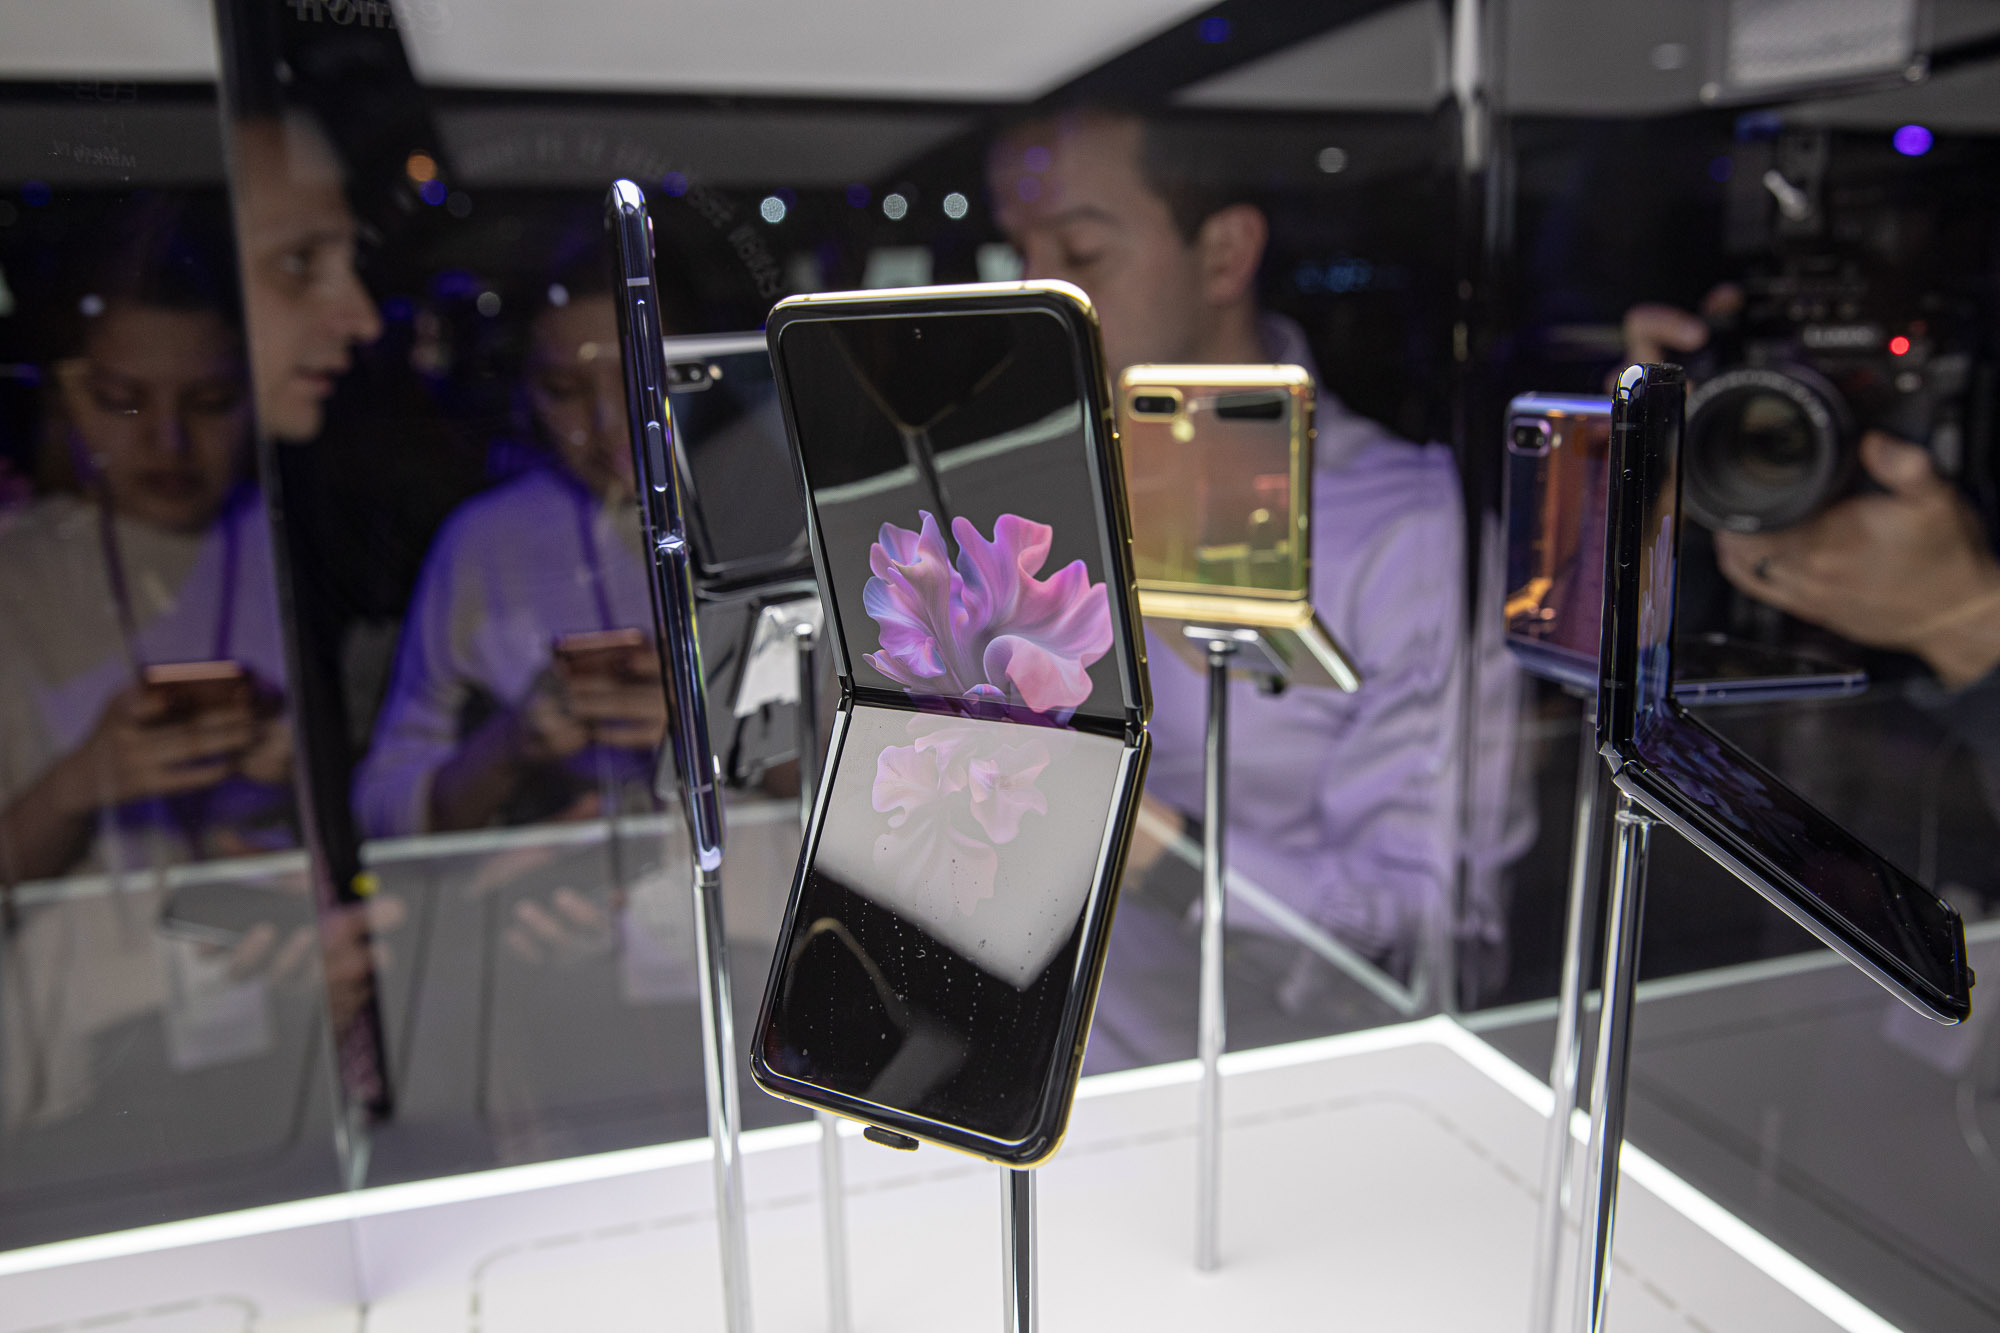 Samsung Announces New "Buy & Try" Program For Its Foldable Smartphones